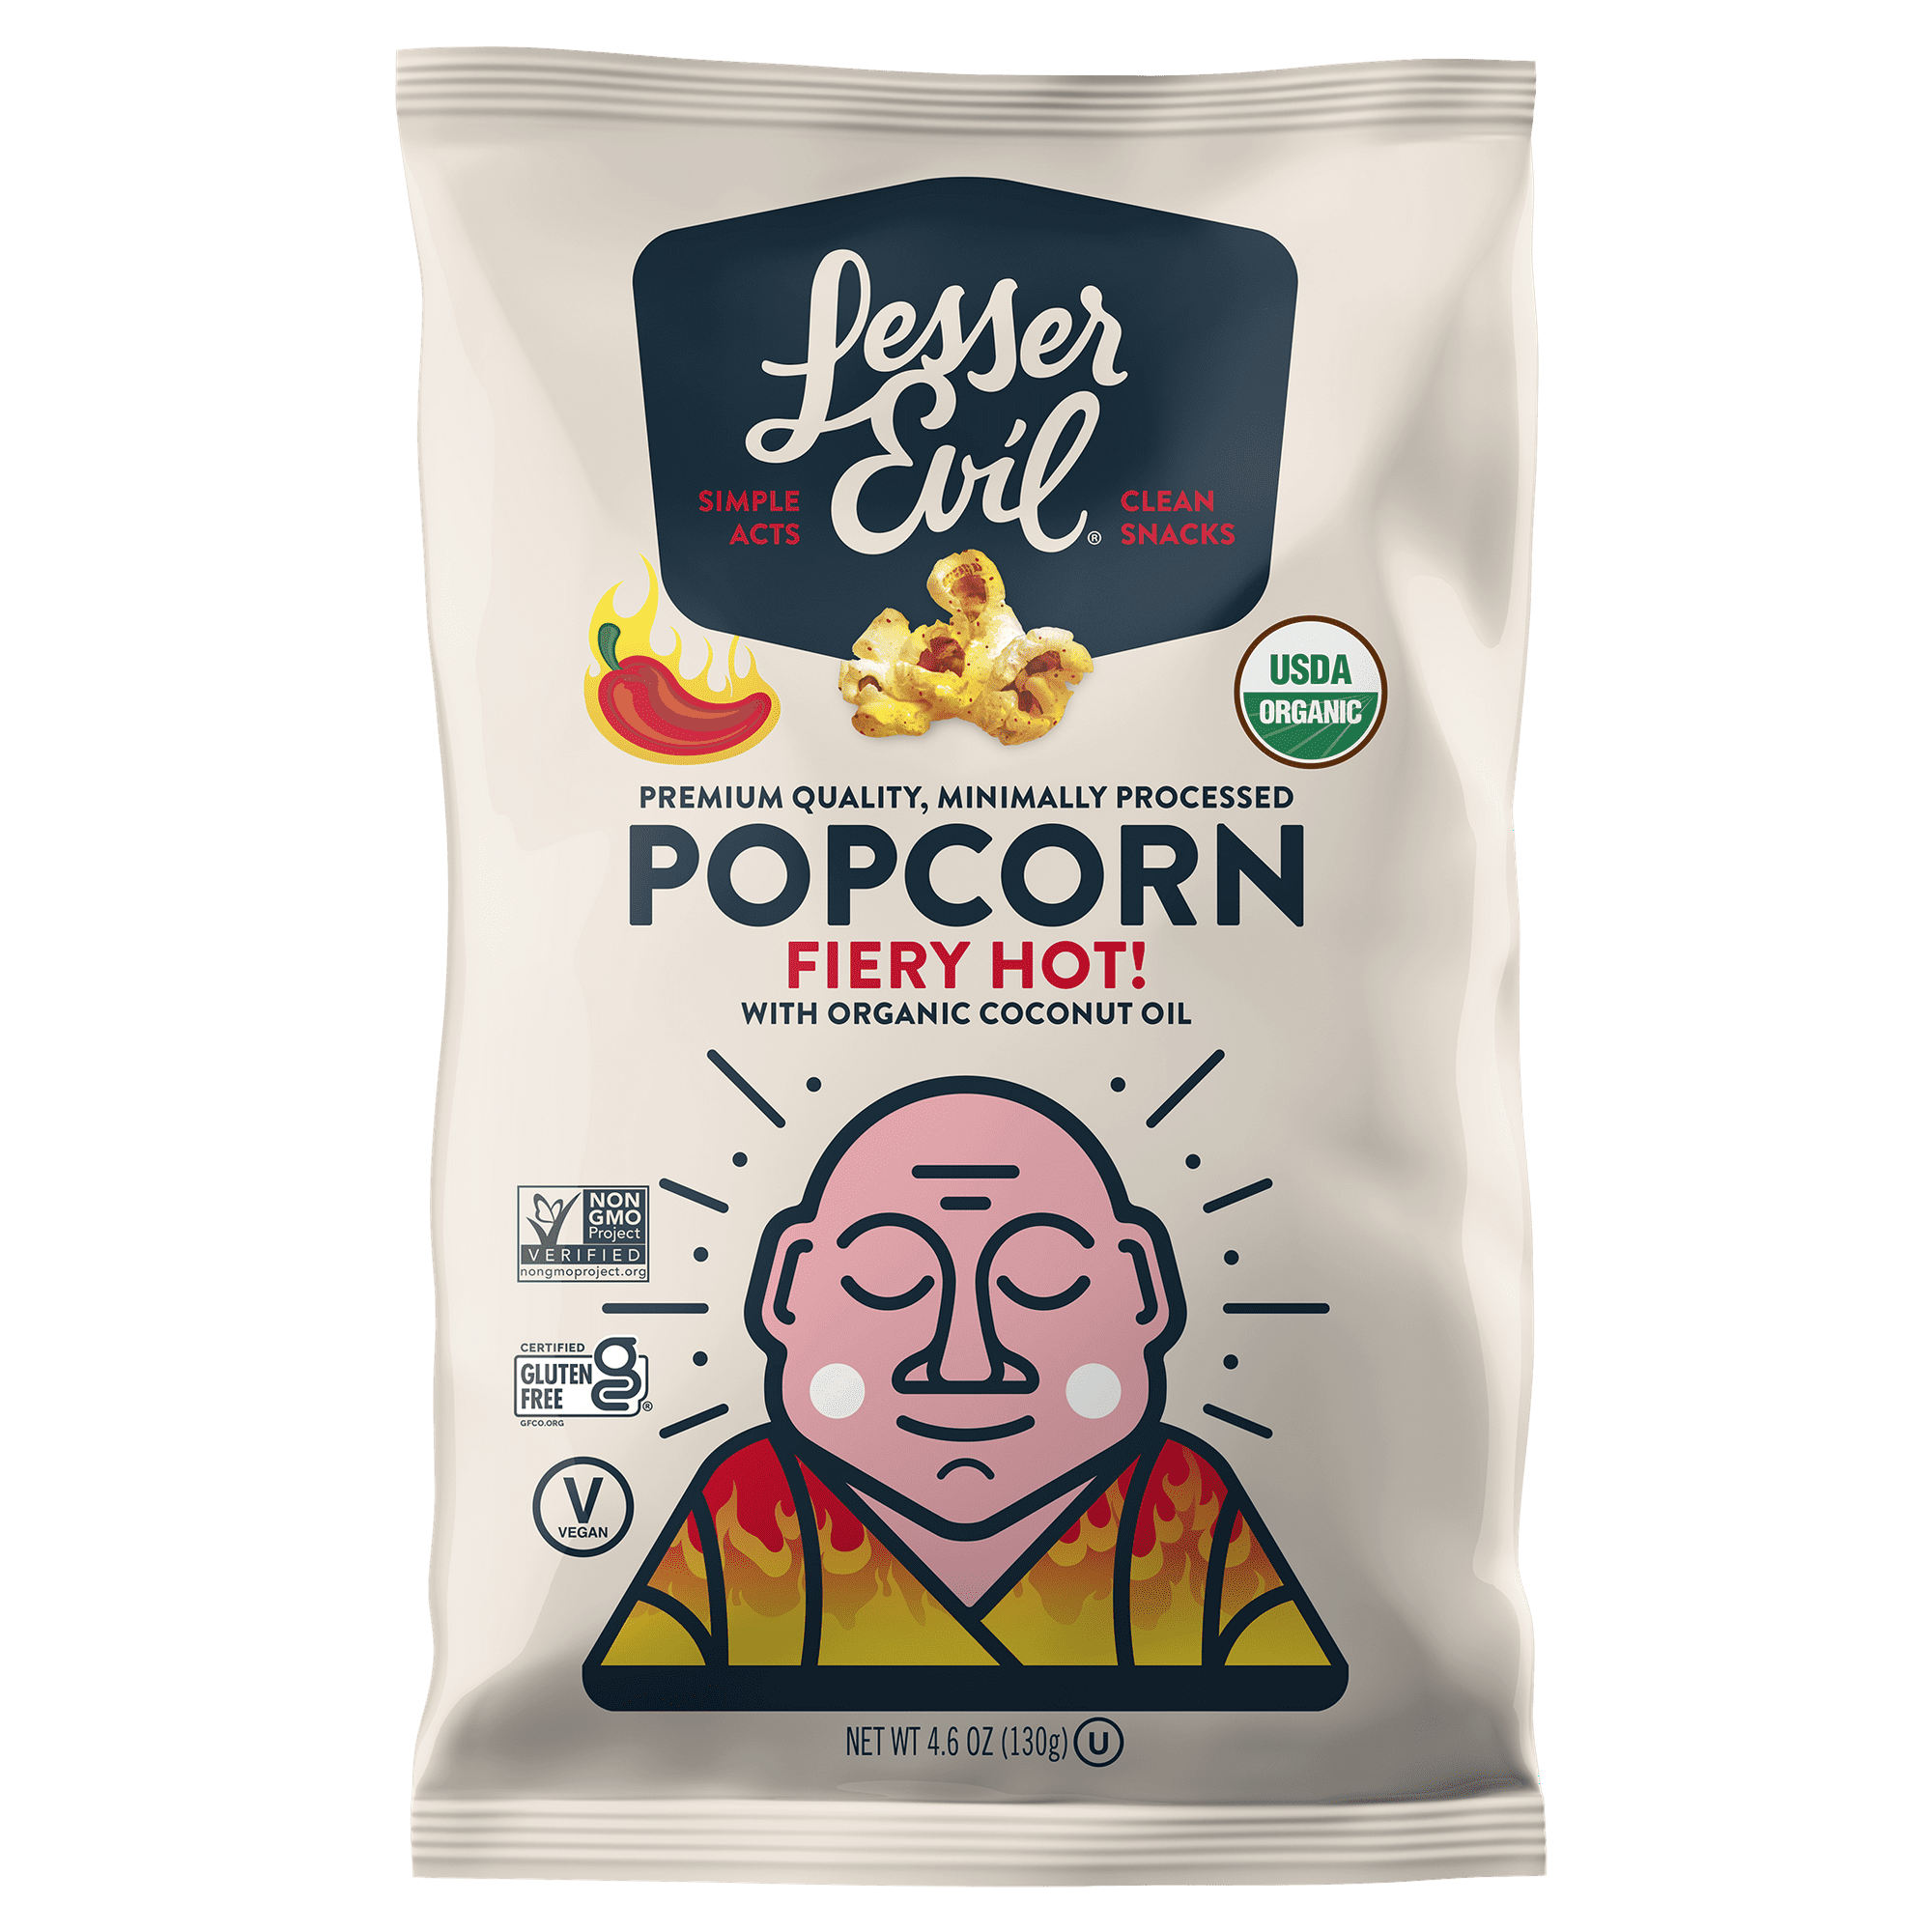 LesserEvil Organic Popcorn, Fiery Hot with Coconut Oil, 4.6 oz